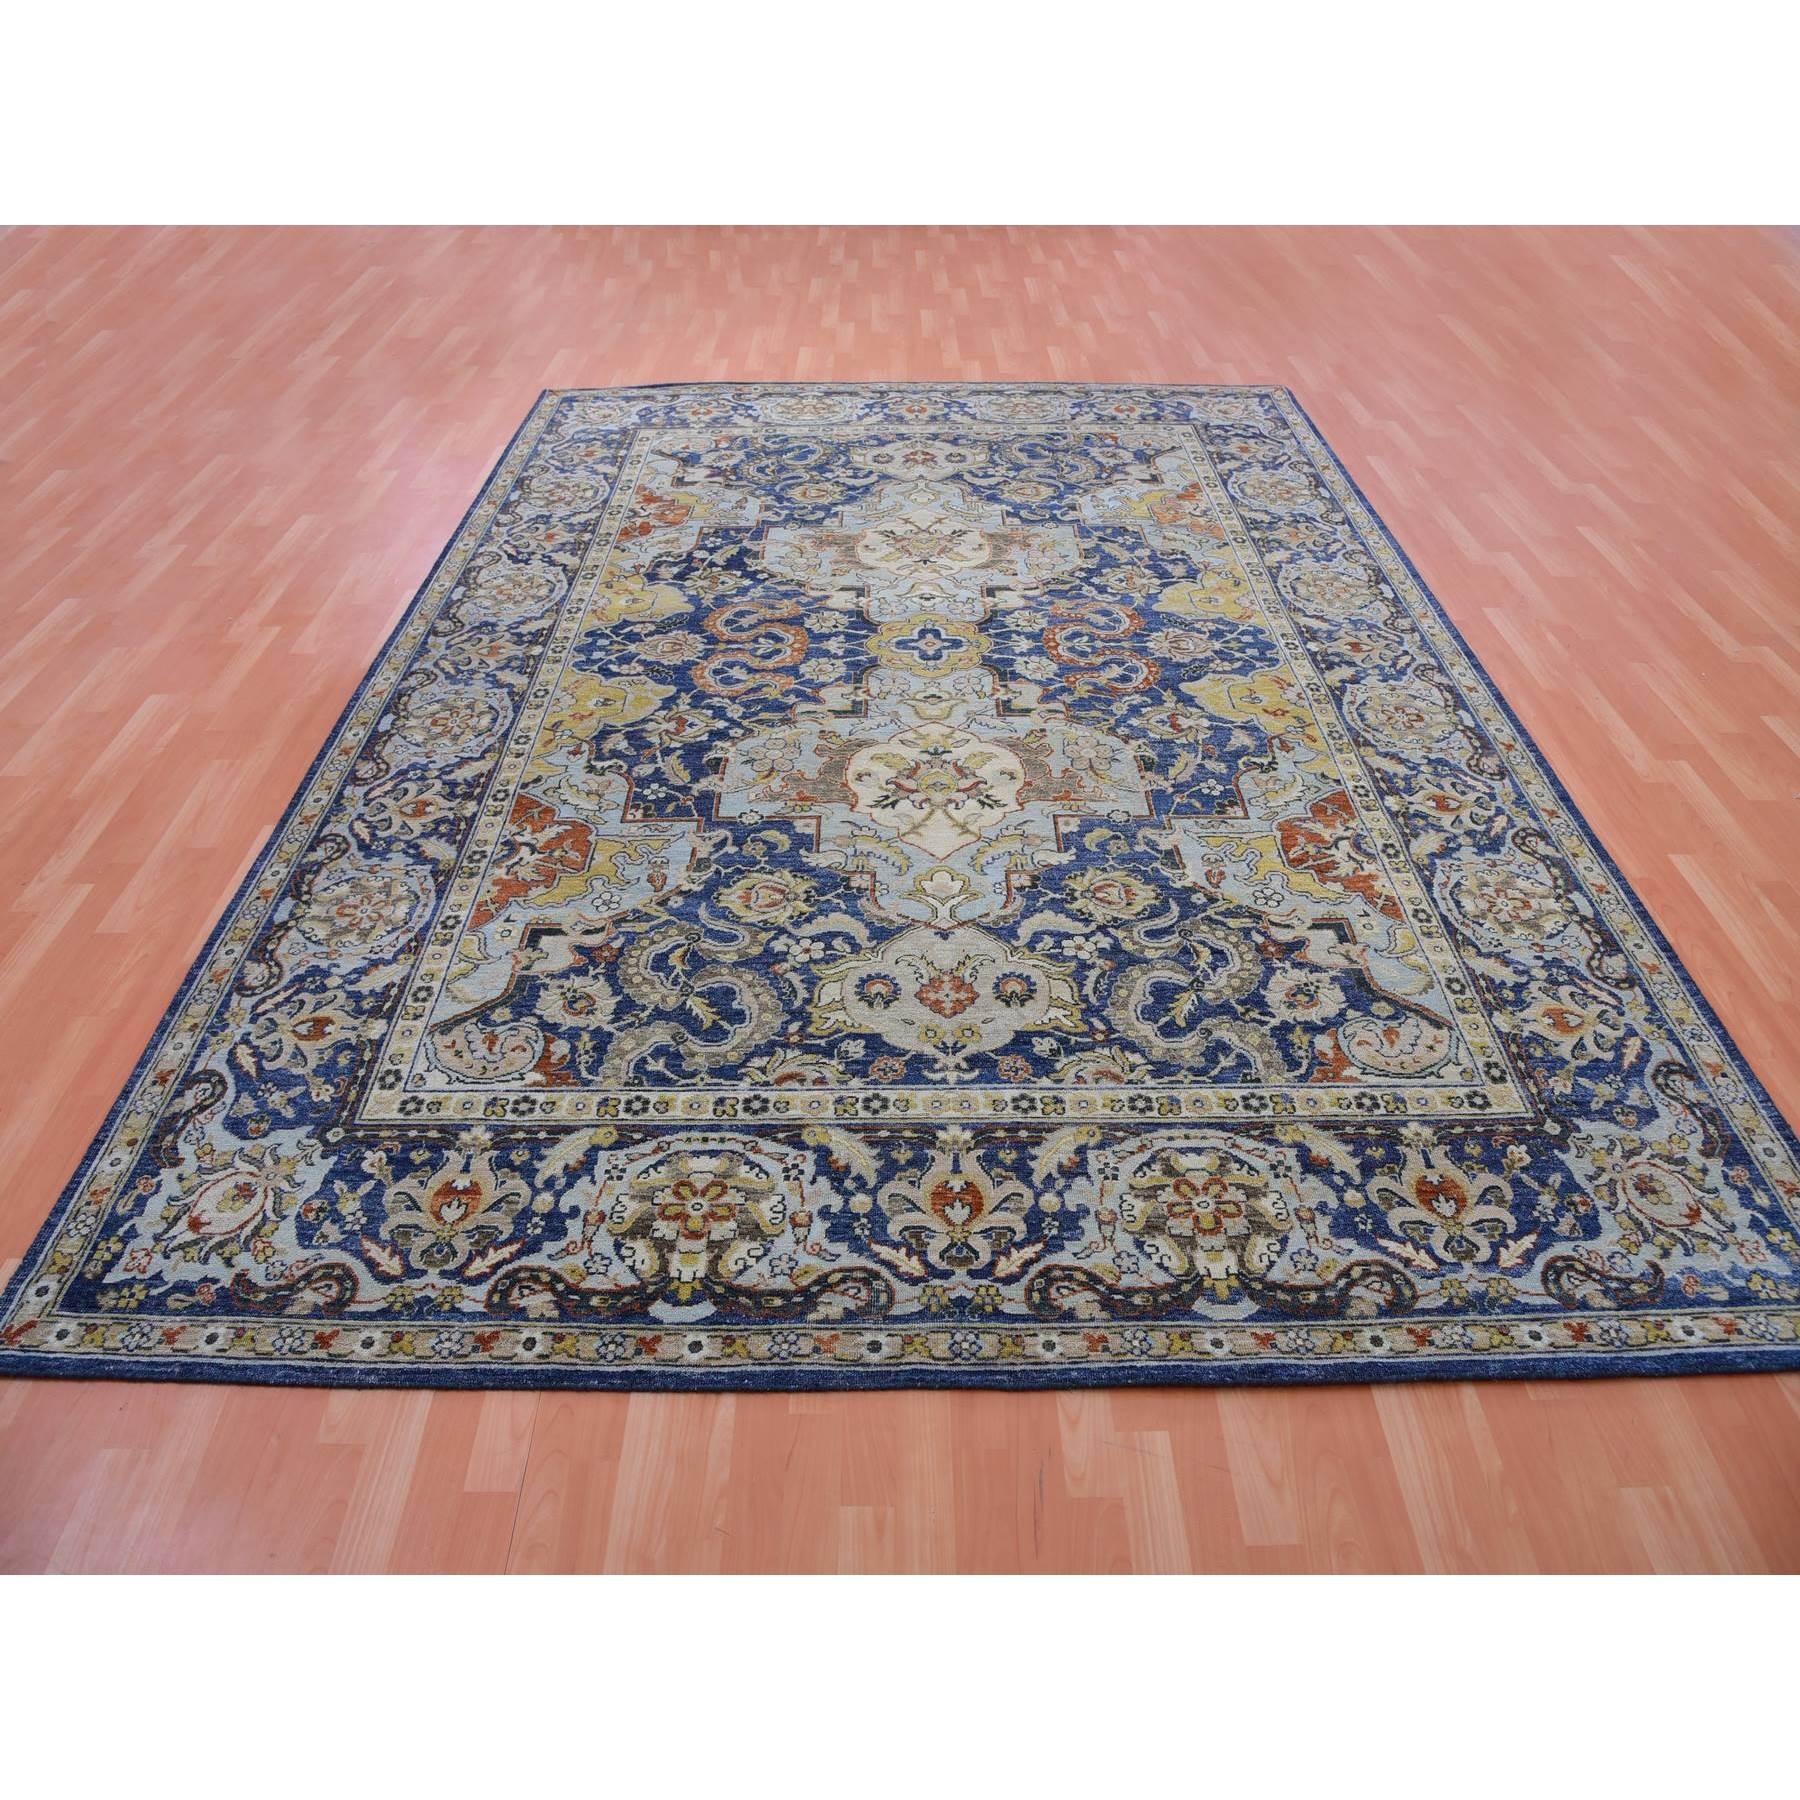 Medieval Beacon Blue Antique Persian Isphahan Inspired Wool Hand Knotted Rug 9'x12'3